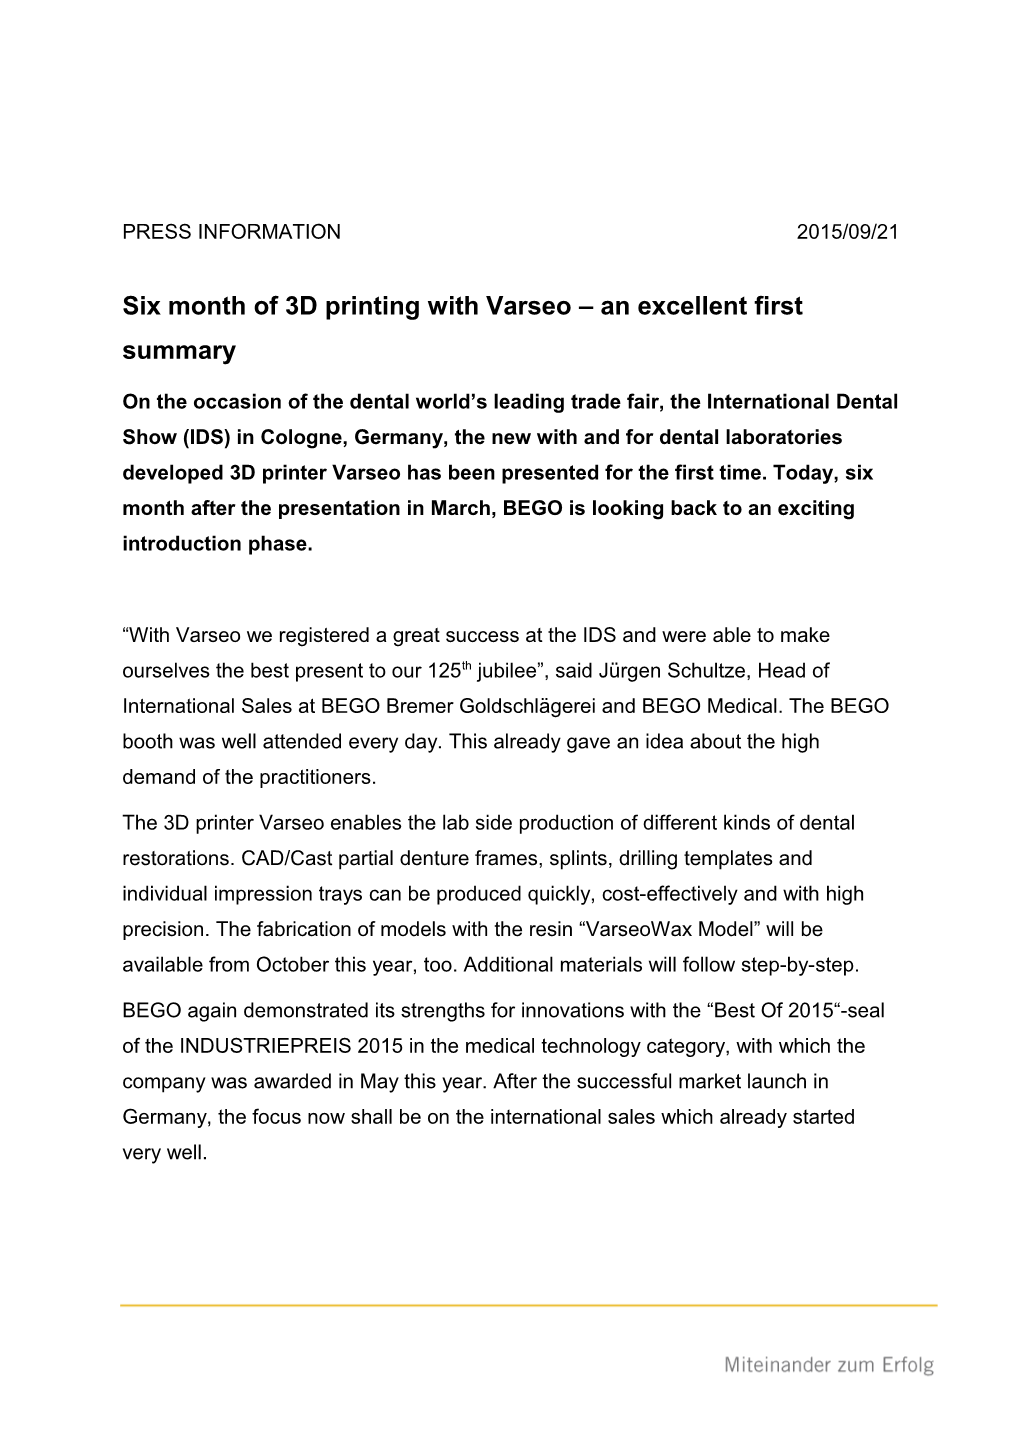 Six Month of 3D Printing with Varseo an Excellent First Summary